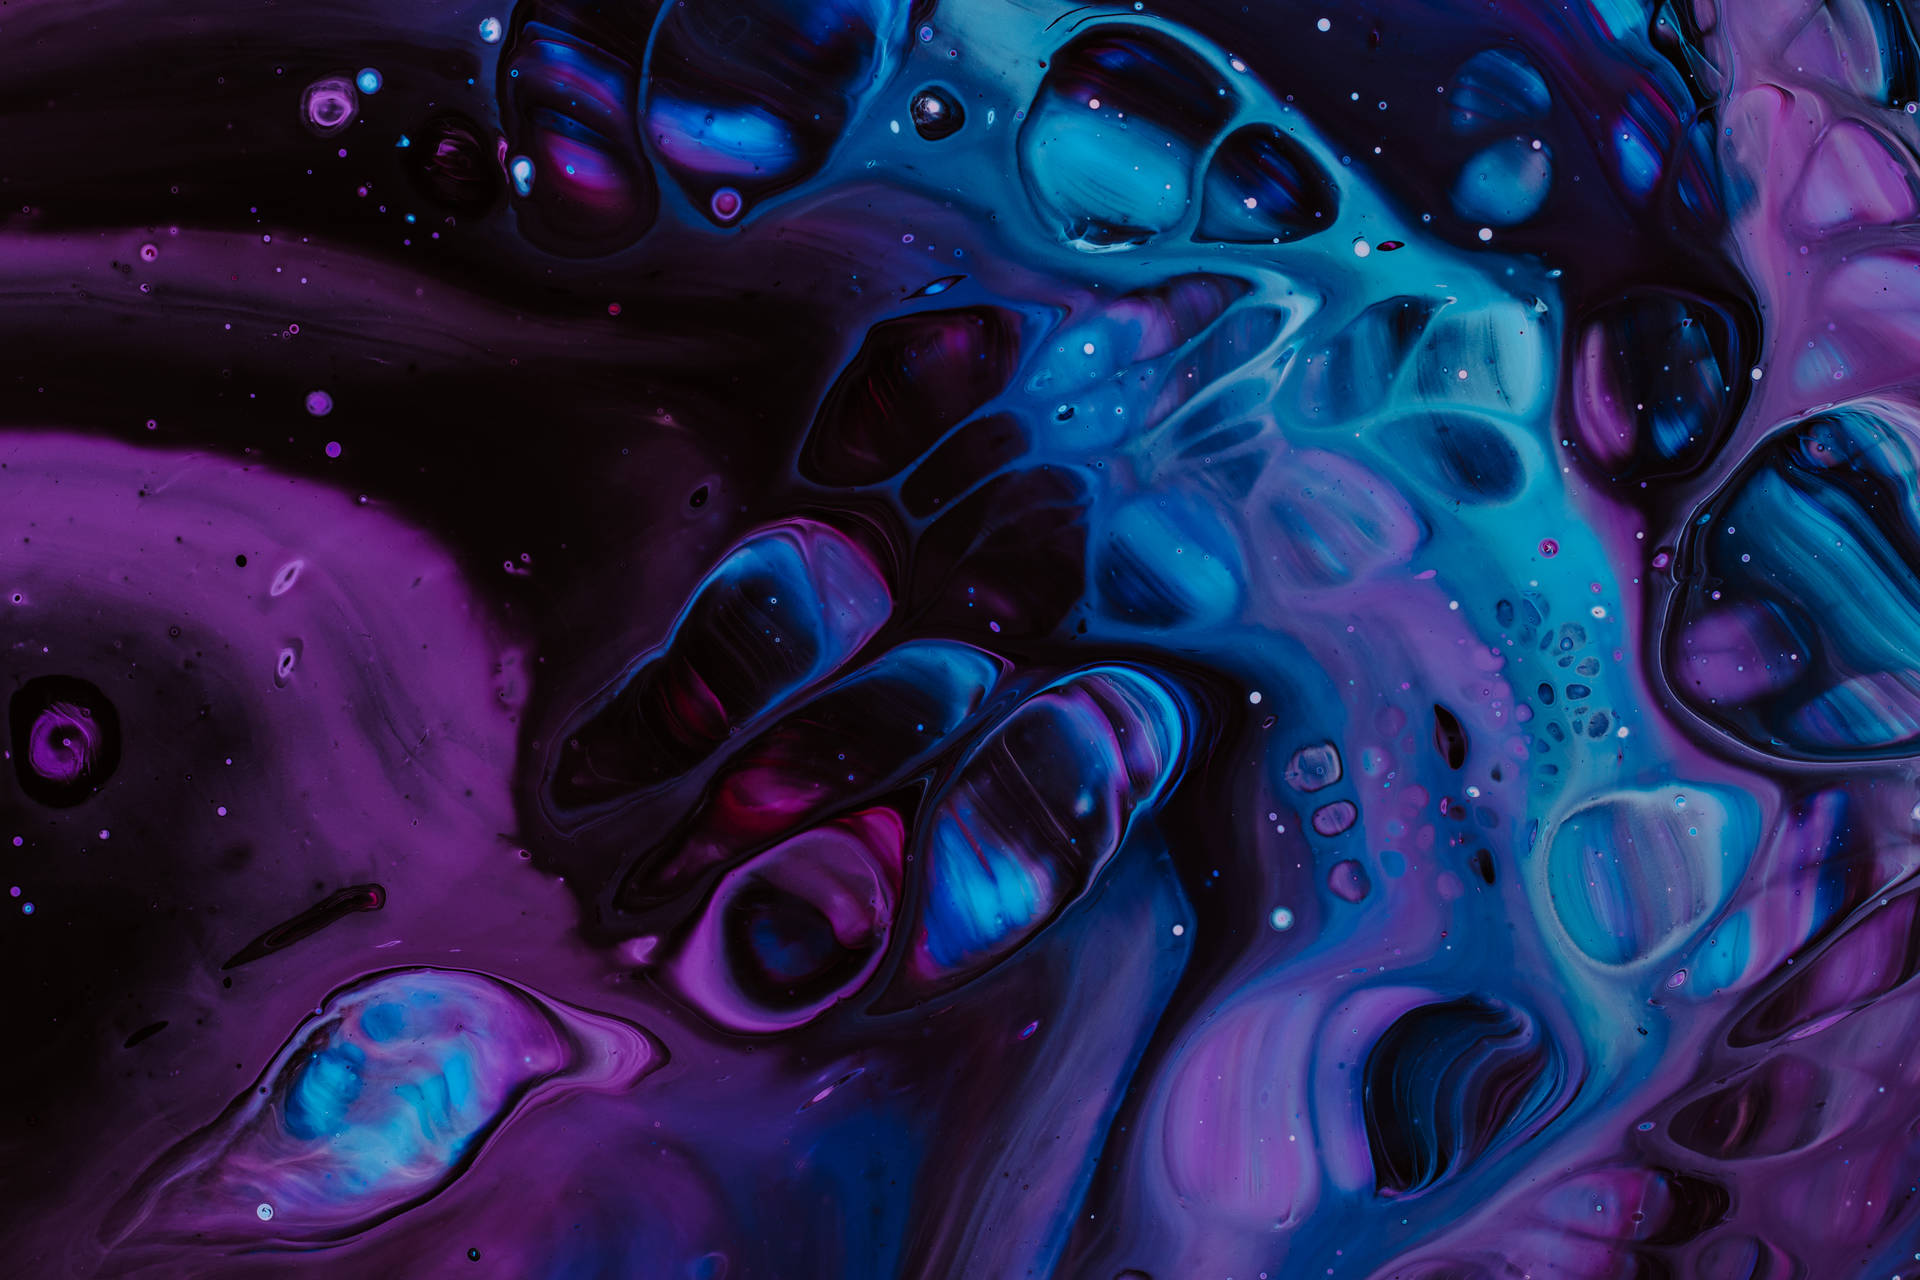 Trippy purple and blue water droplets on smooth surface wallpaper.